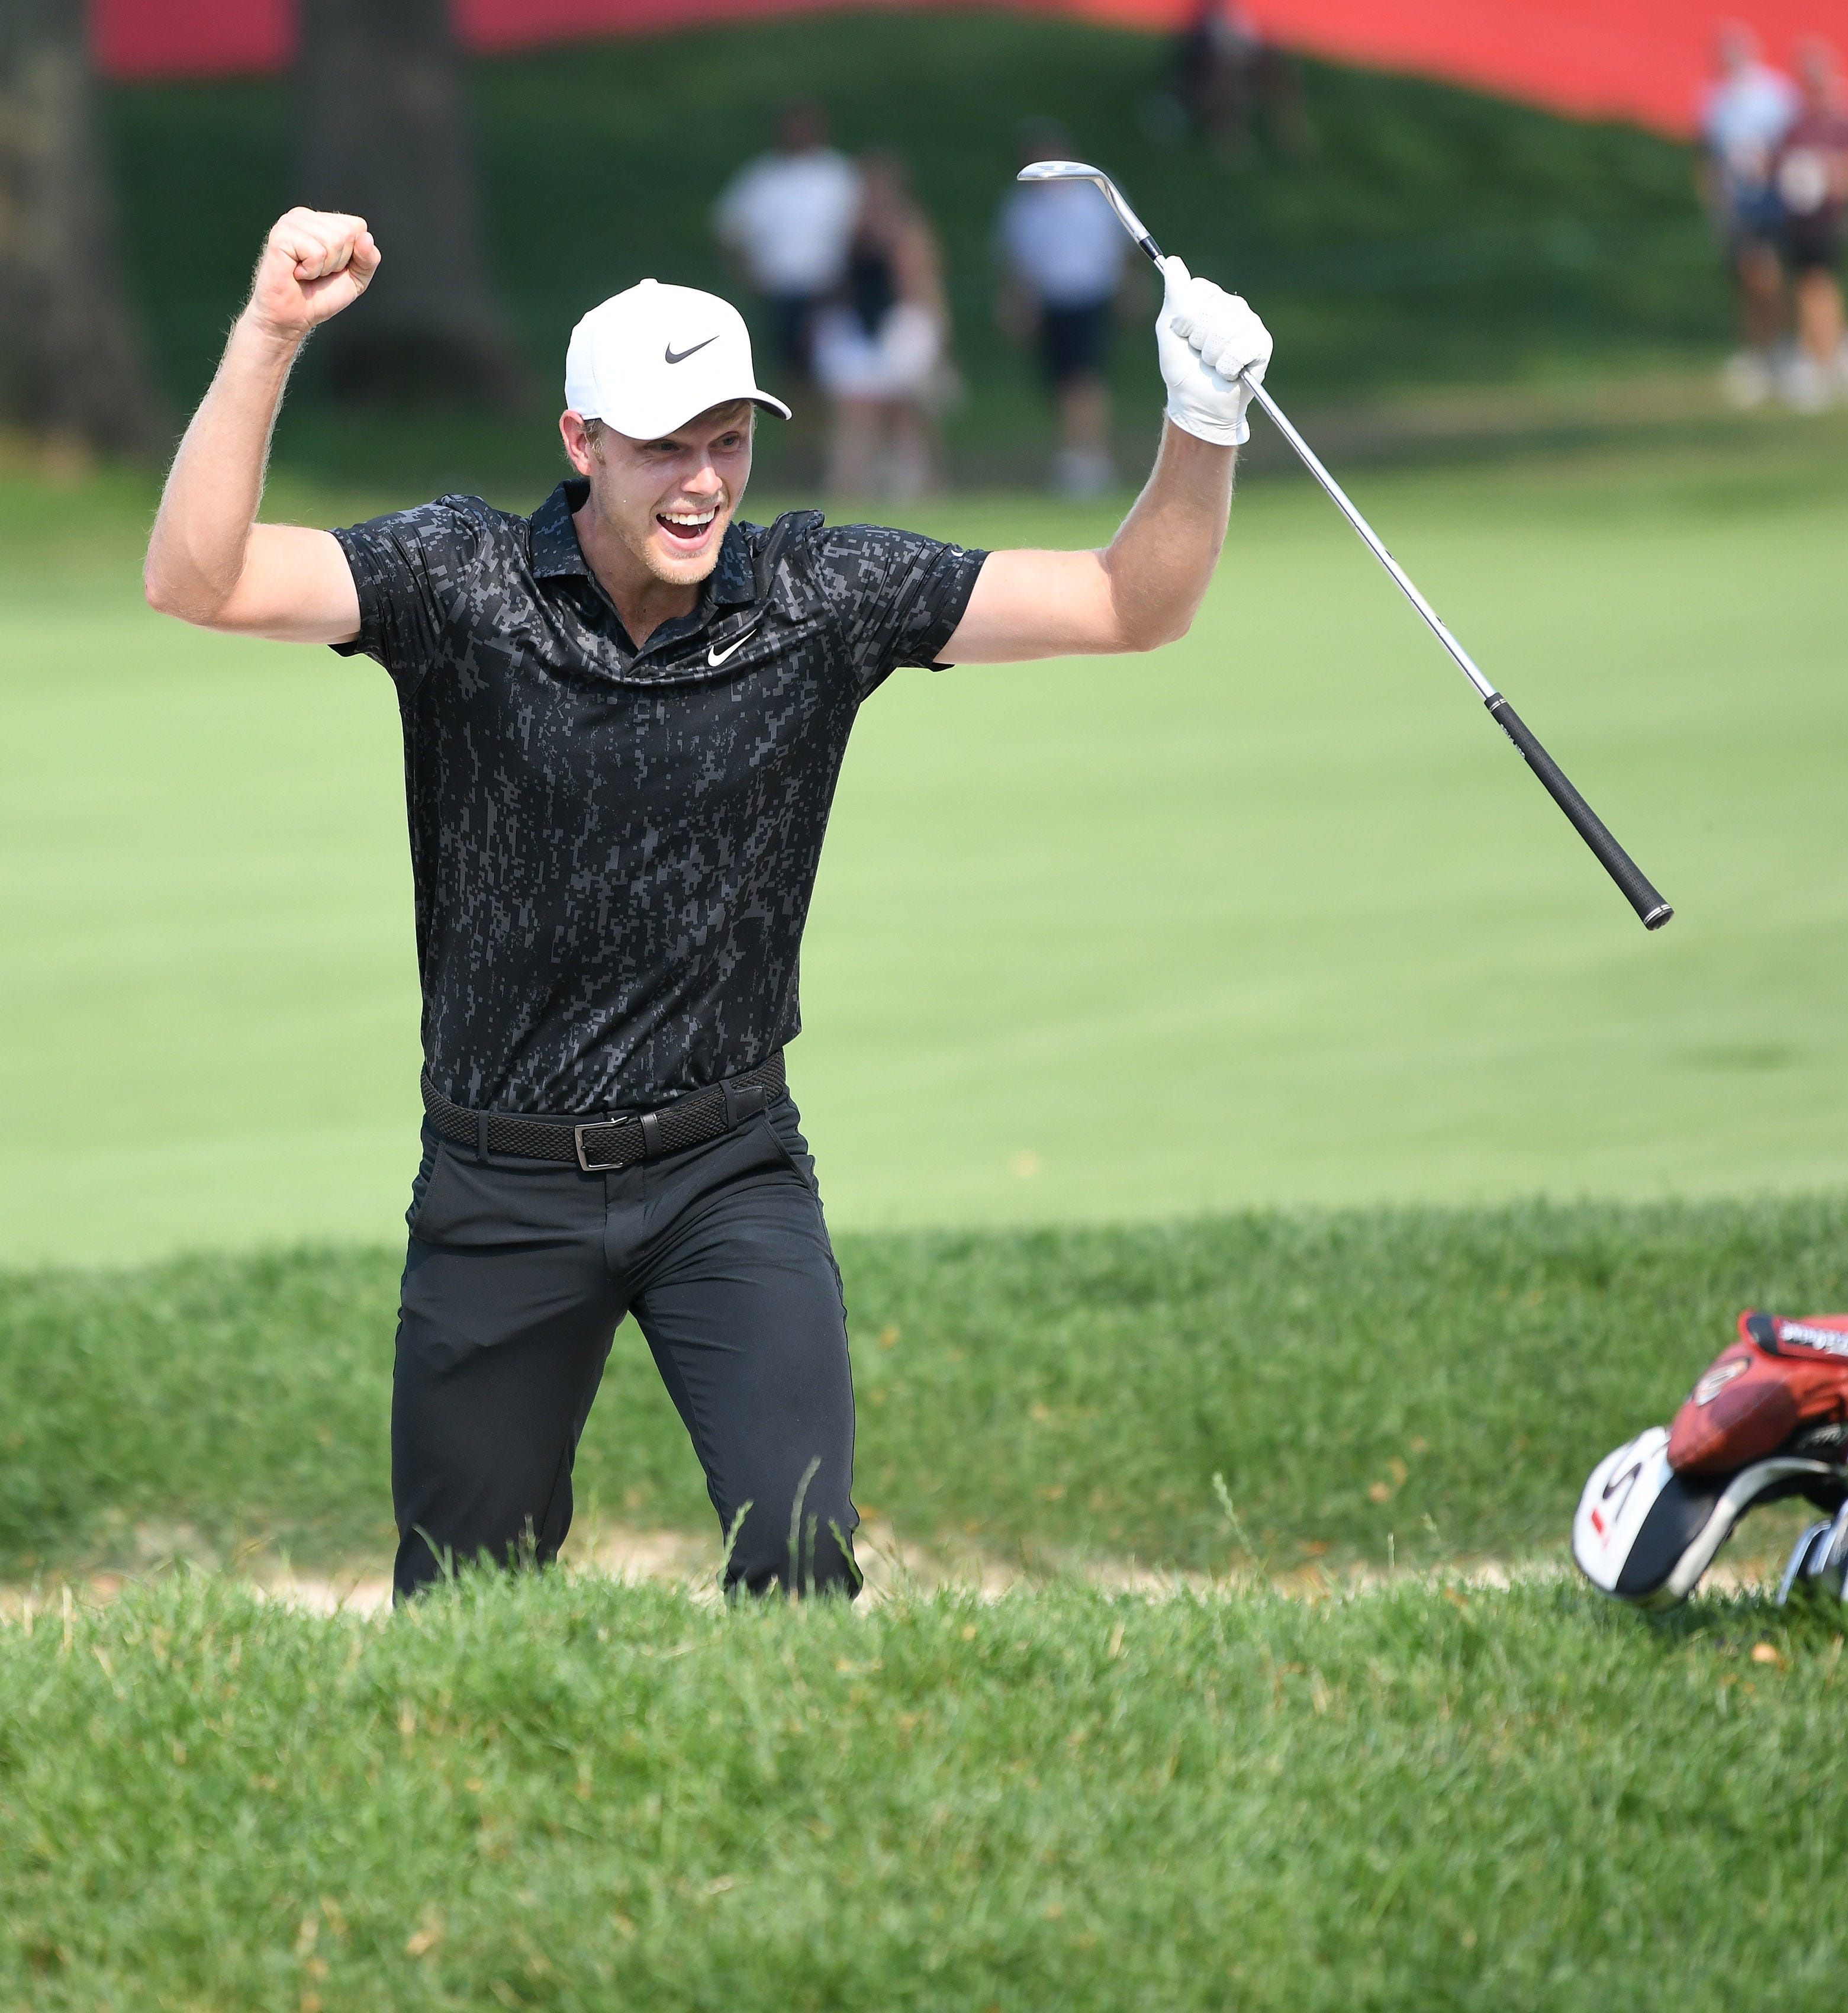 Cam Davis reacts after he hits an eagle out of the sand trap on 17 in the final round of the Rocket Mortgage Classic in 2021.